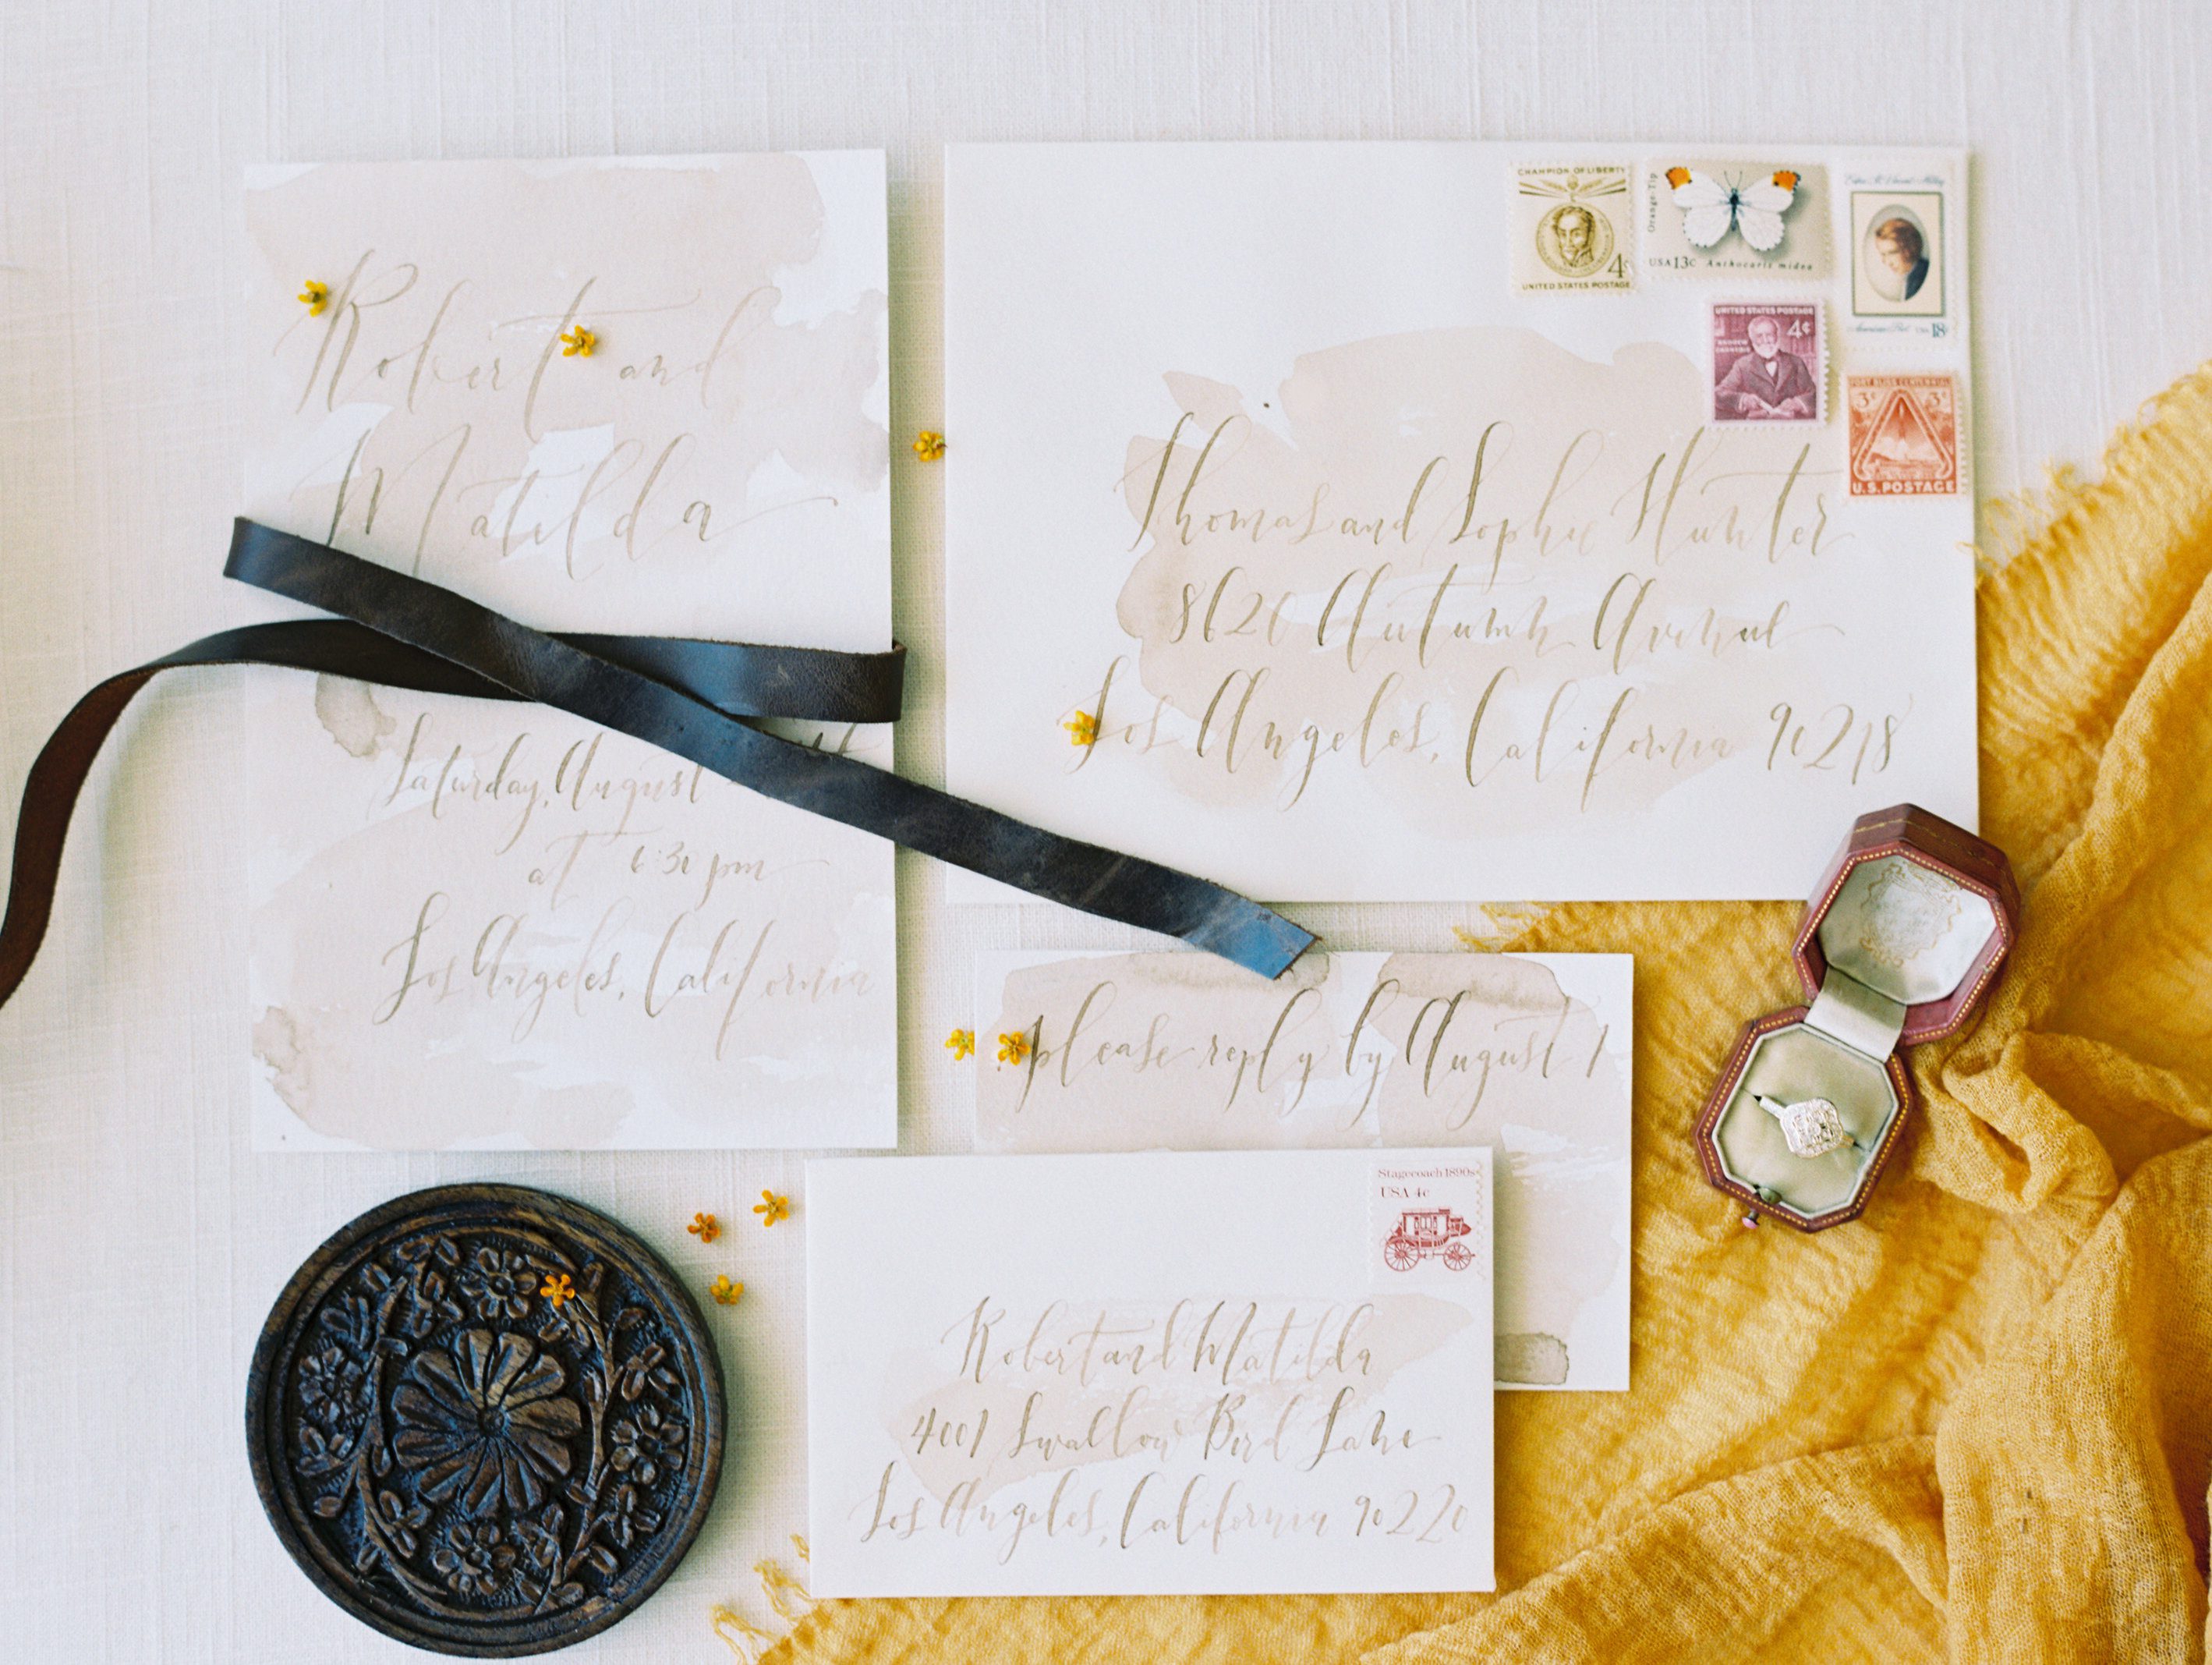 hand written wedding invitation styled with leather